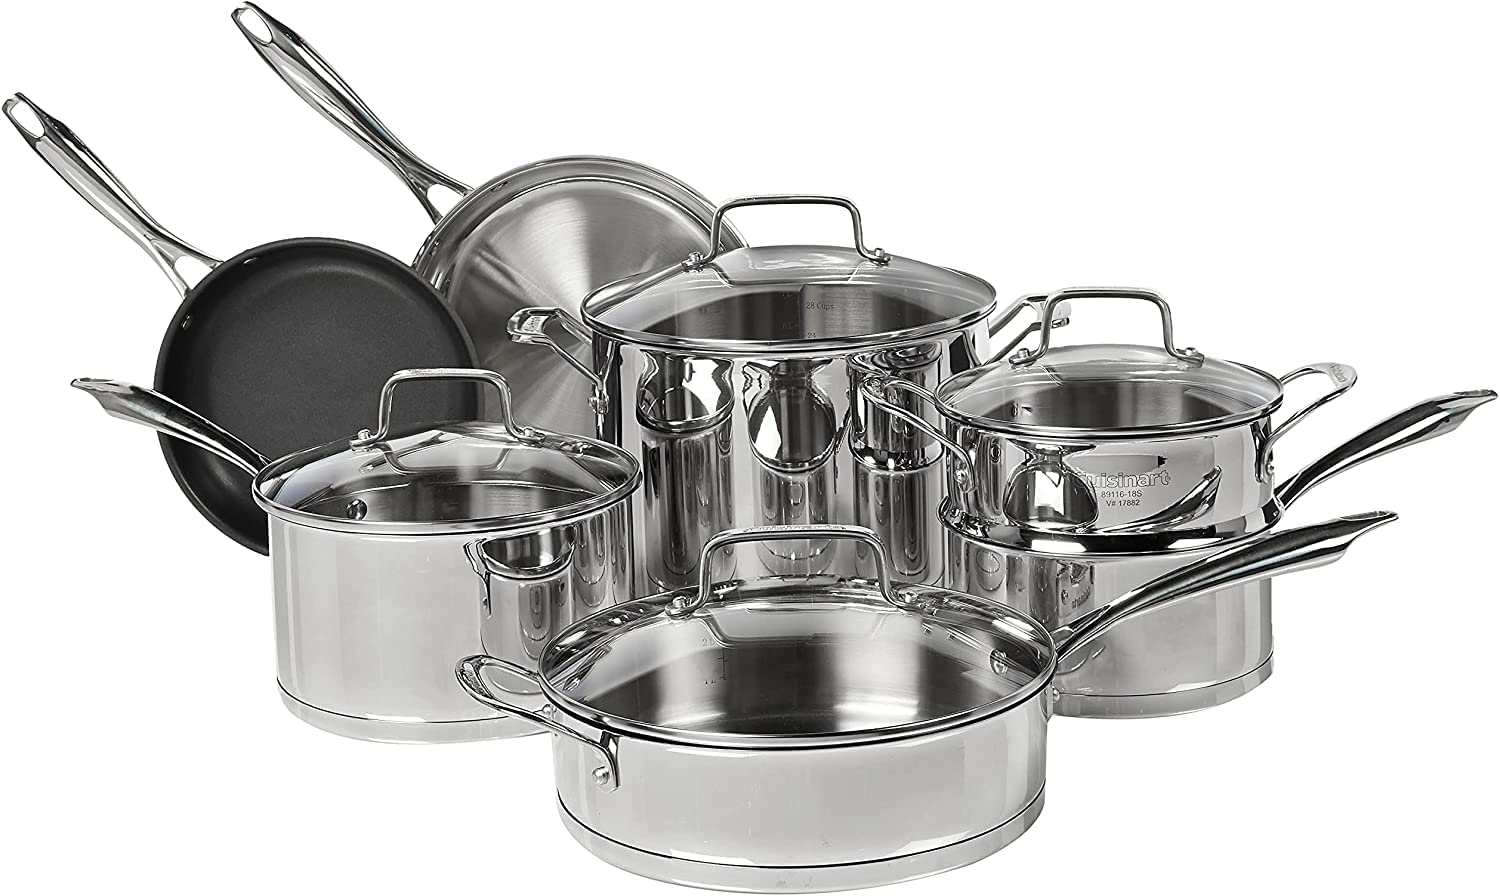 Duxtop Professional Stainless Steel Pots and Pans Set, 18-Piece